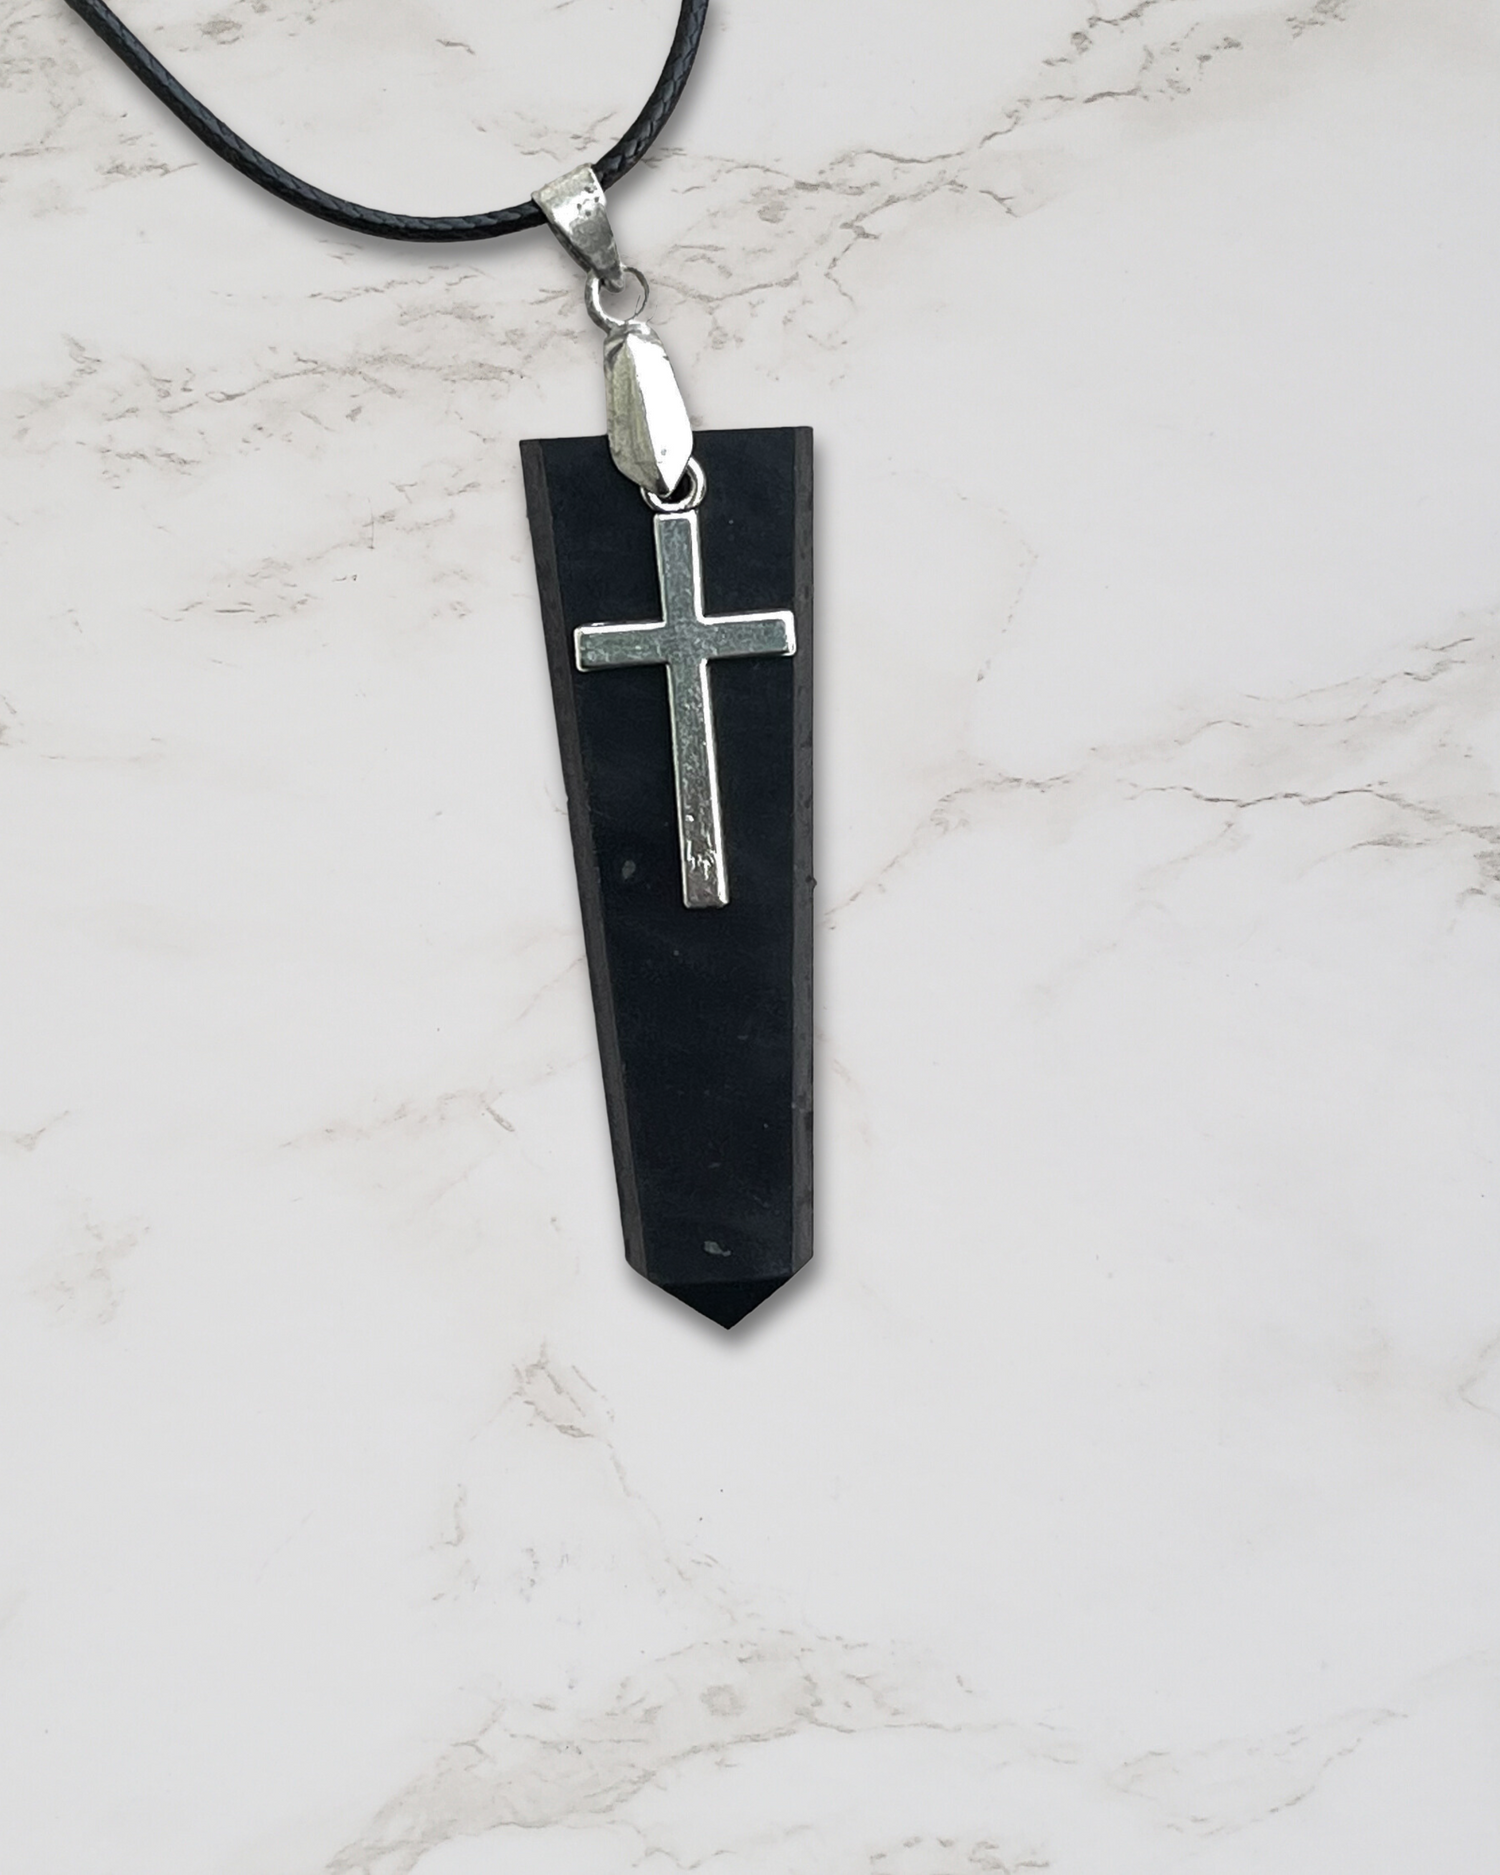 Frequency Jewelry Natural Pain Relief and Protection from 5G and EMFs Shungite Pendant Necklace with Cross Charm